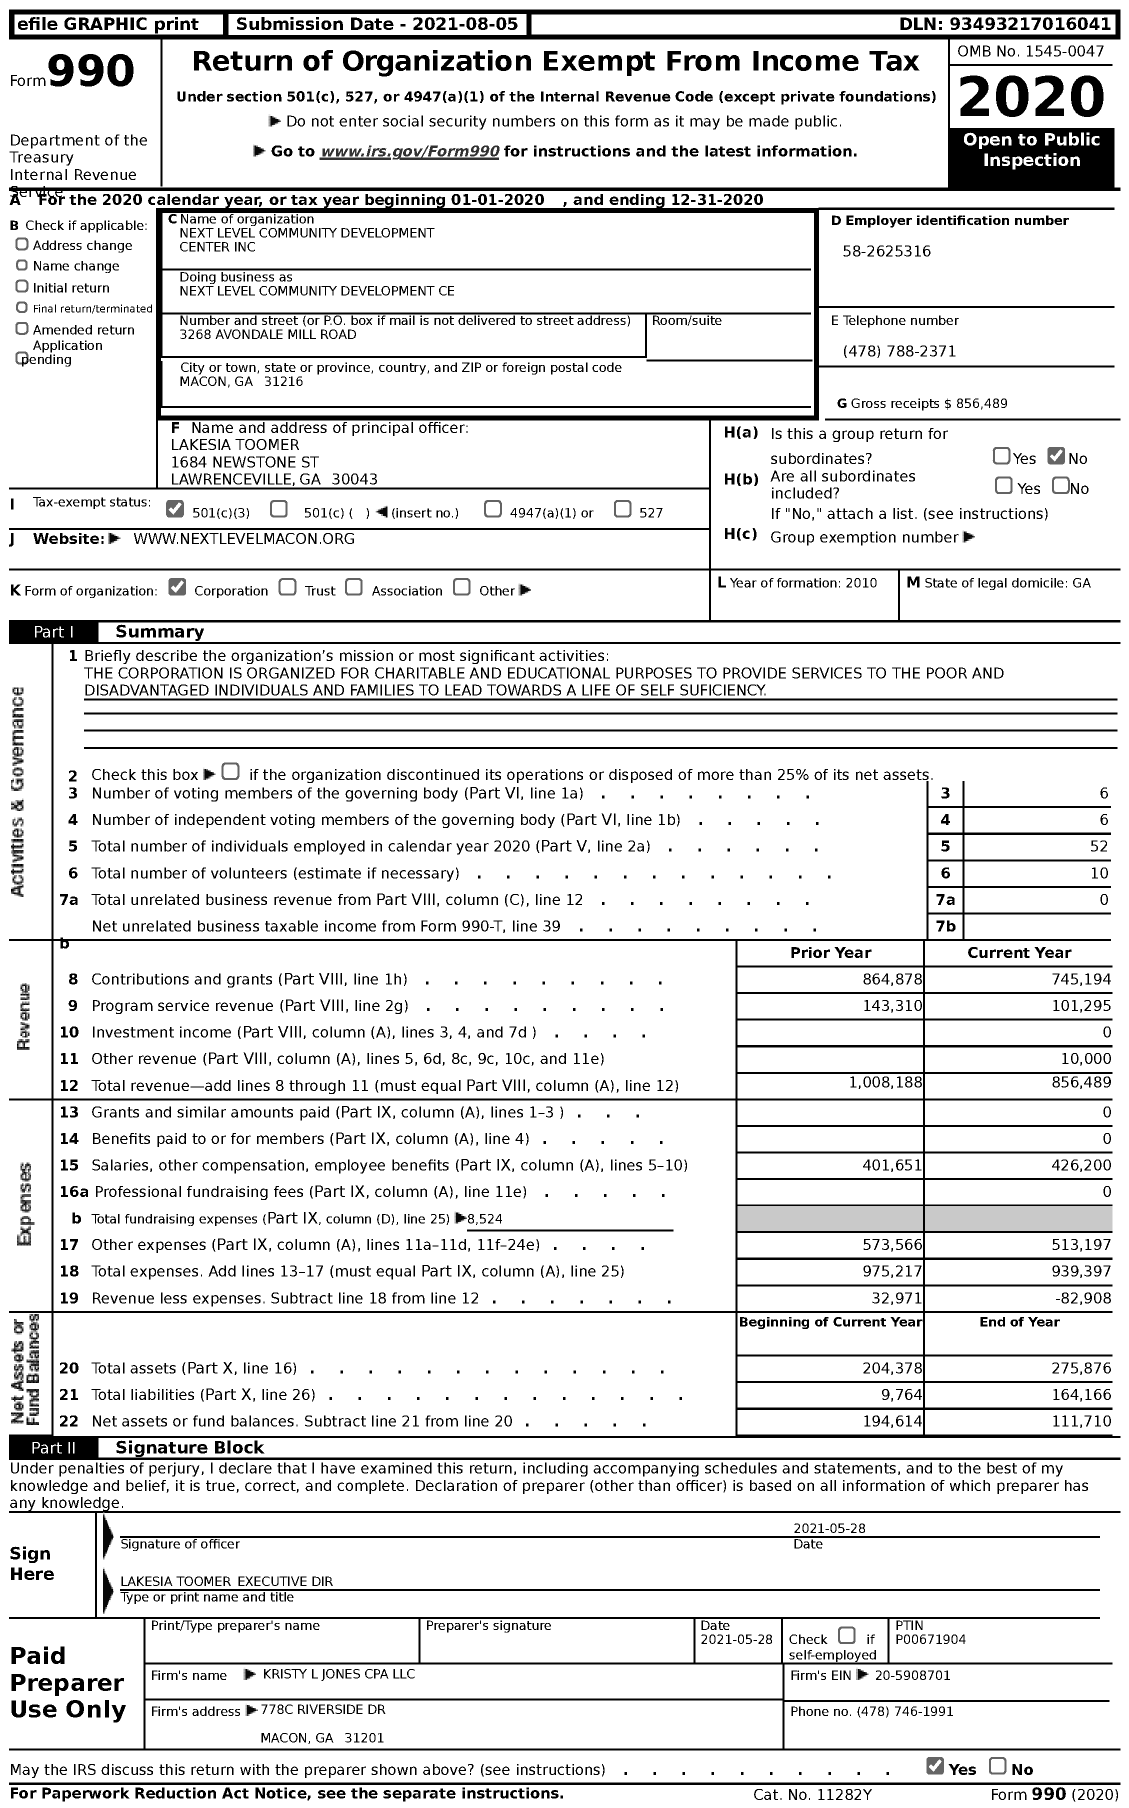 Image of first page of 2020 Form 990 for Next Level Community Development Center